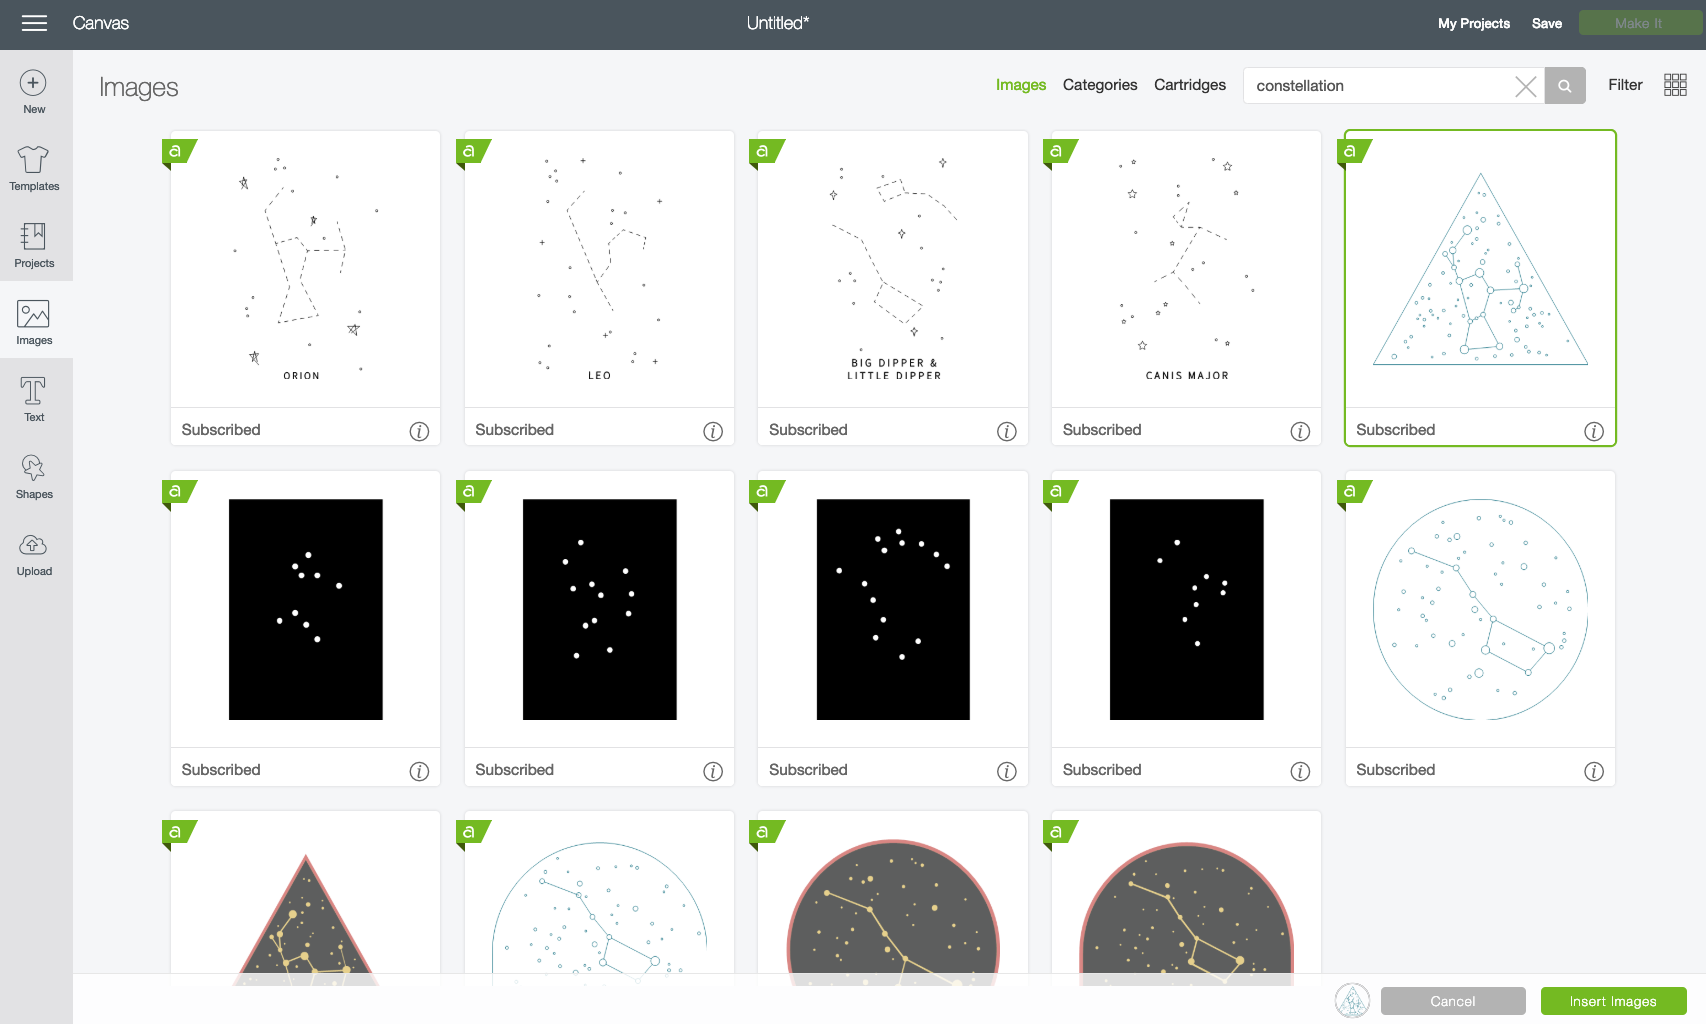 Create a new document and click on Images, and then search in the upper right for "constellation."